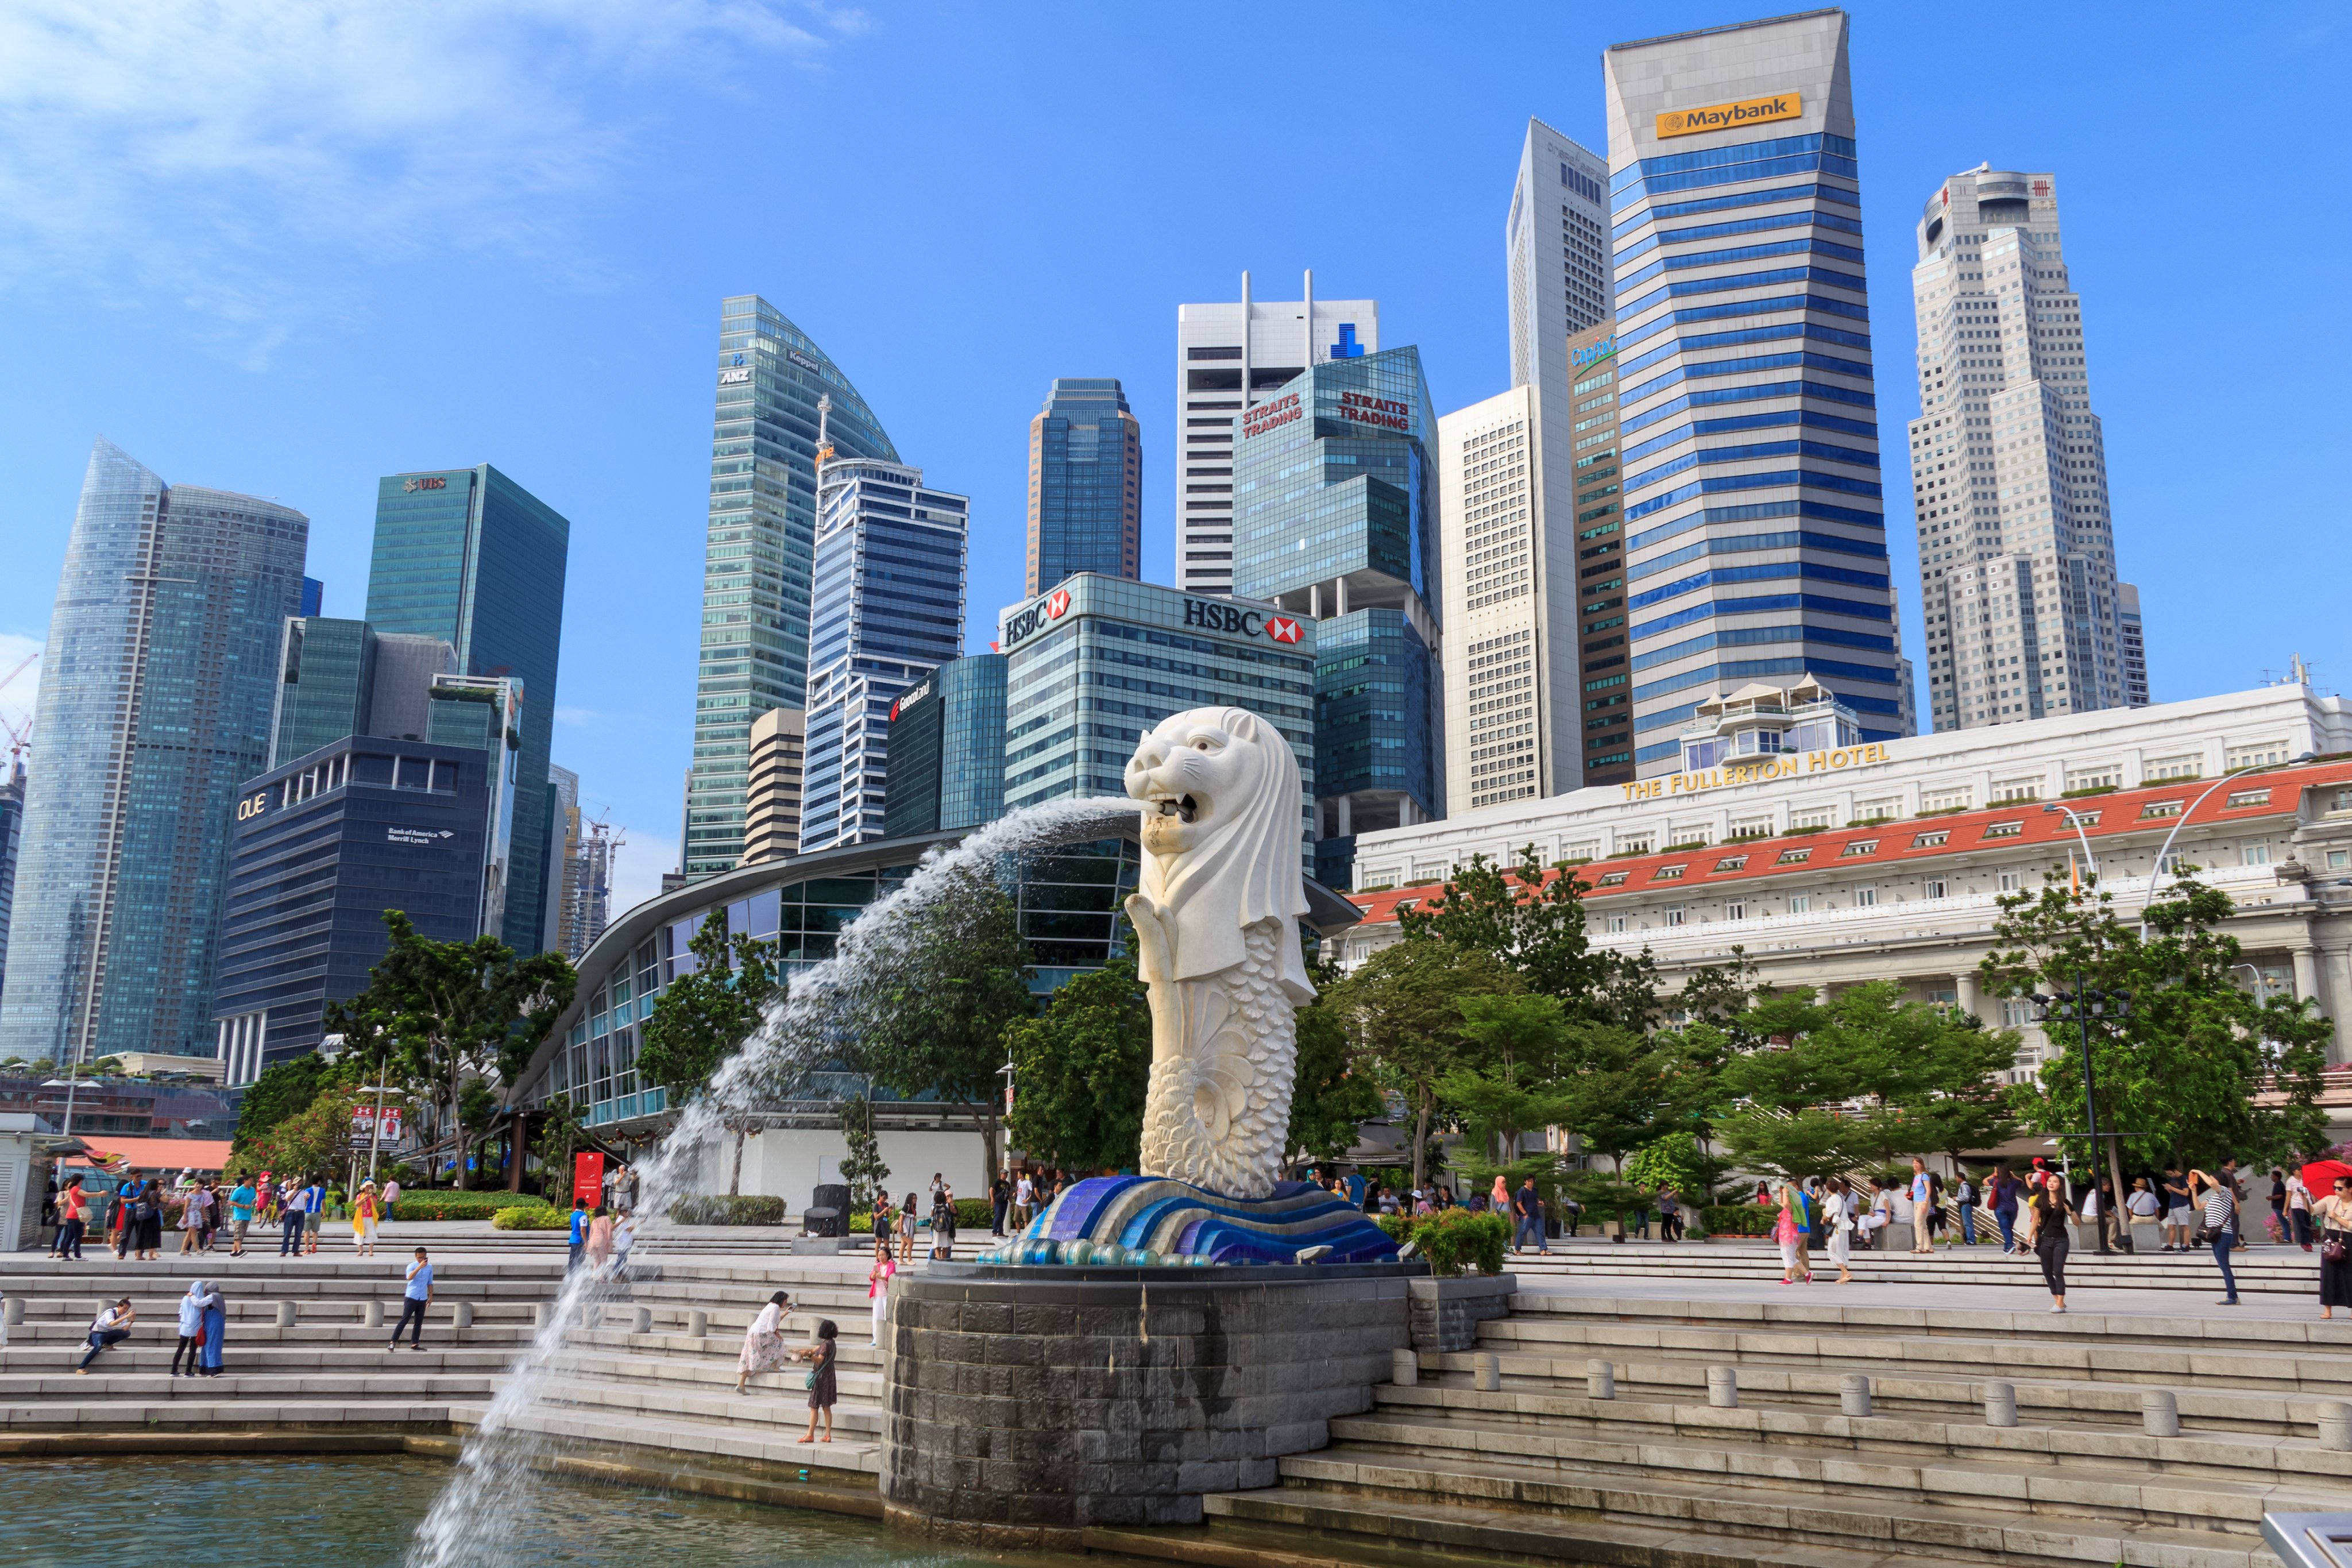 Southeast Asia is seeing growing interest from investors, with Singapore as the biggest regional beneficiary from US-China tensions. Photo: Shutterstock